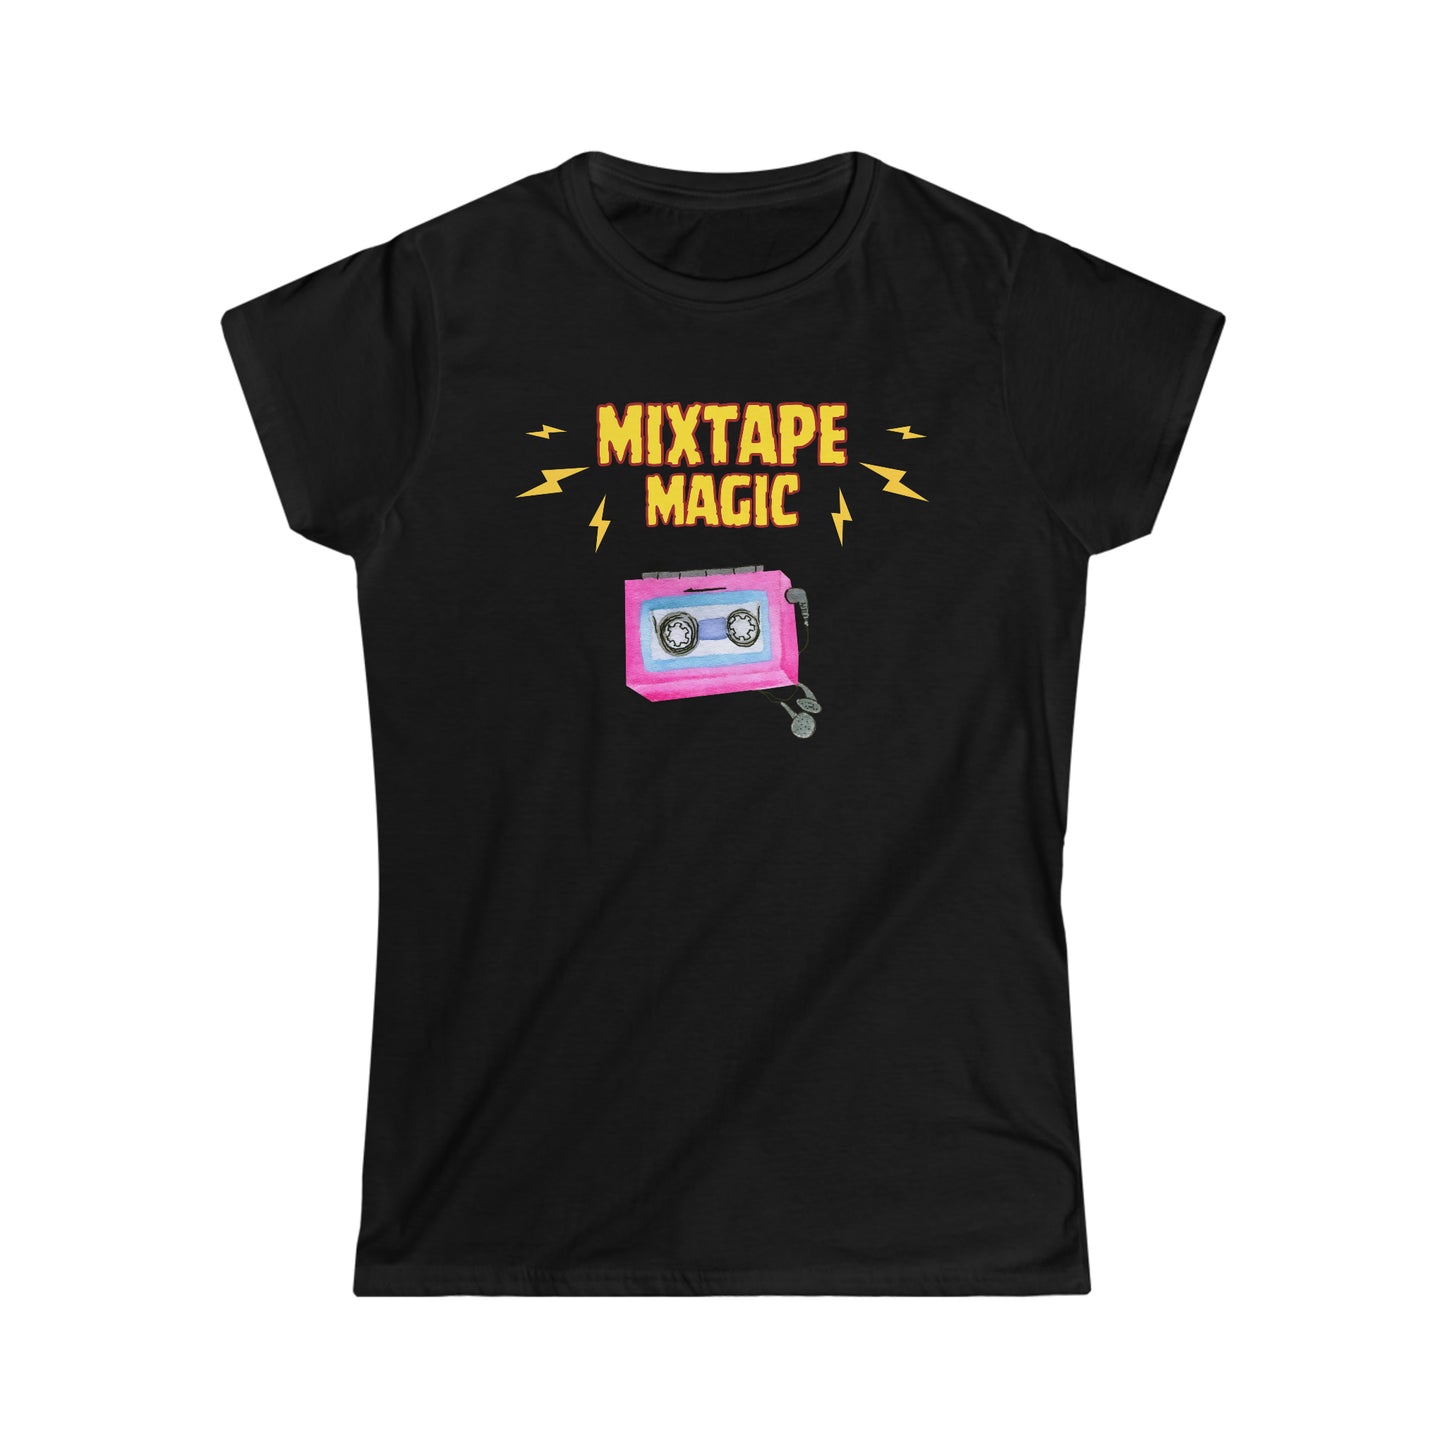 A T-shirt with the text "Mixtape magic" and a picture of a cassette player with headphones